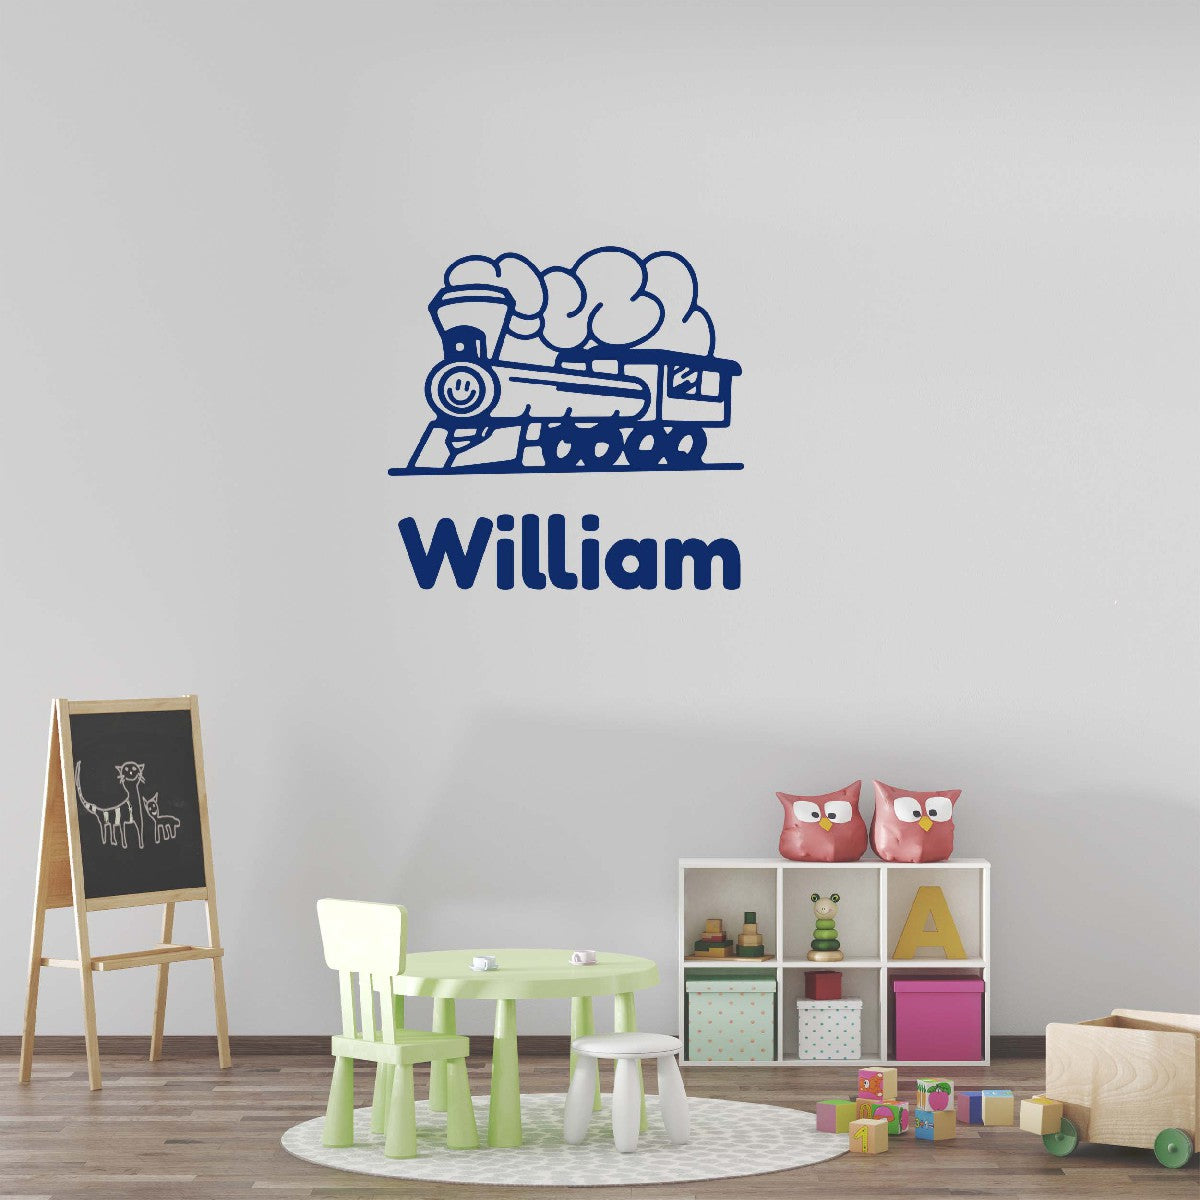 Personalized Name Stickers with Locomotive - Fade-Resistant Custom Name Stickers for any Kids Bedroom Decor - Removable Name Decals for Walls Furniture Laptop